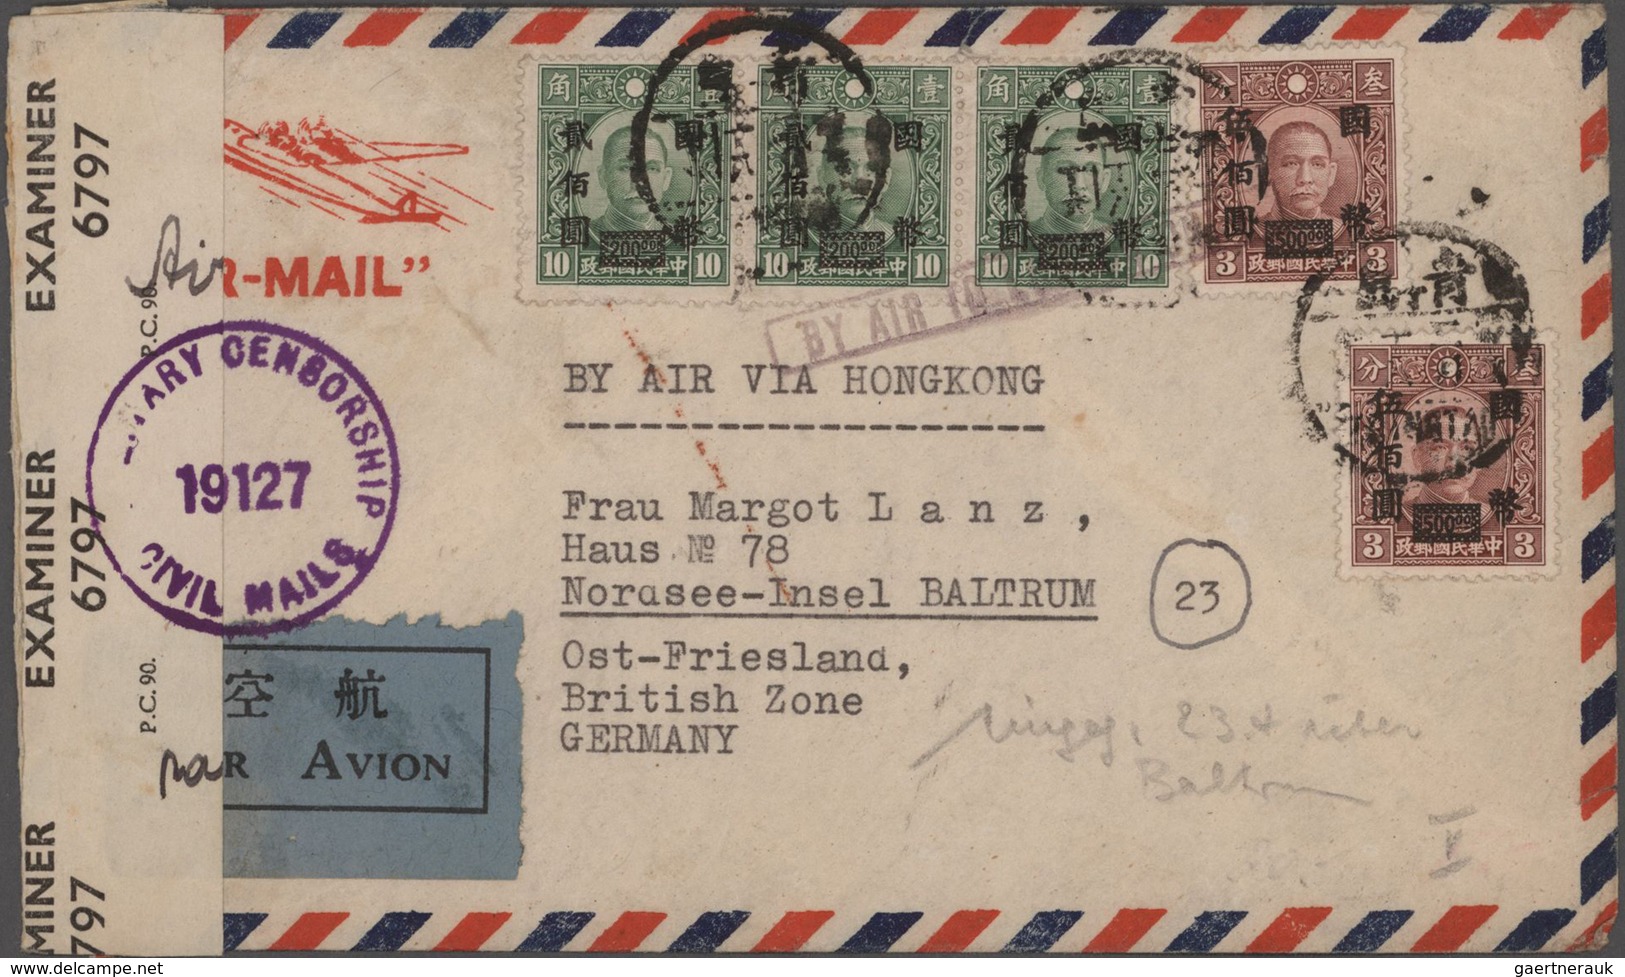 China: 1932/47, covers (6): official cover by air mail from Kwangsi Statistical office to German Con